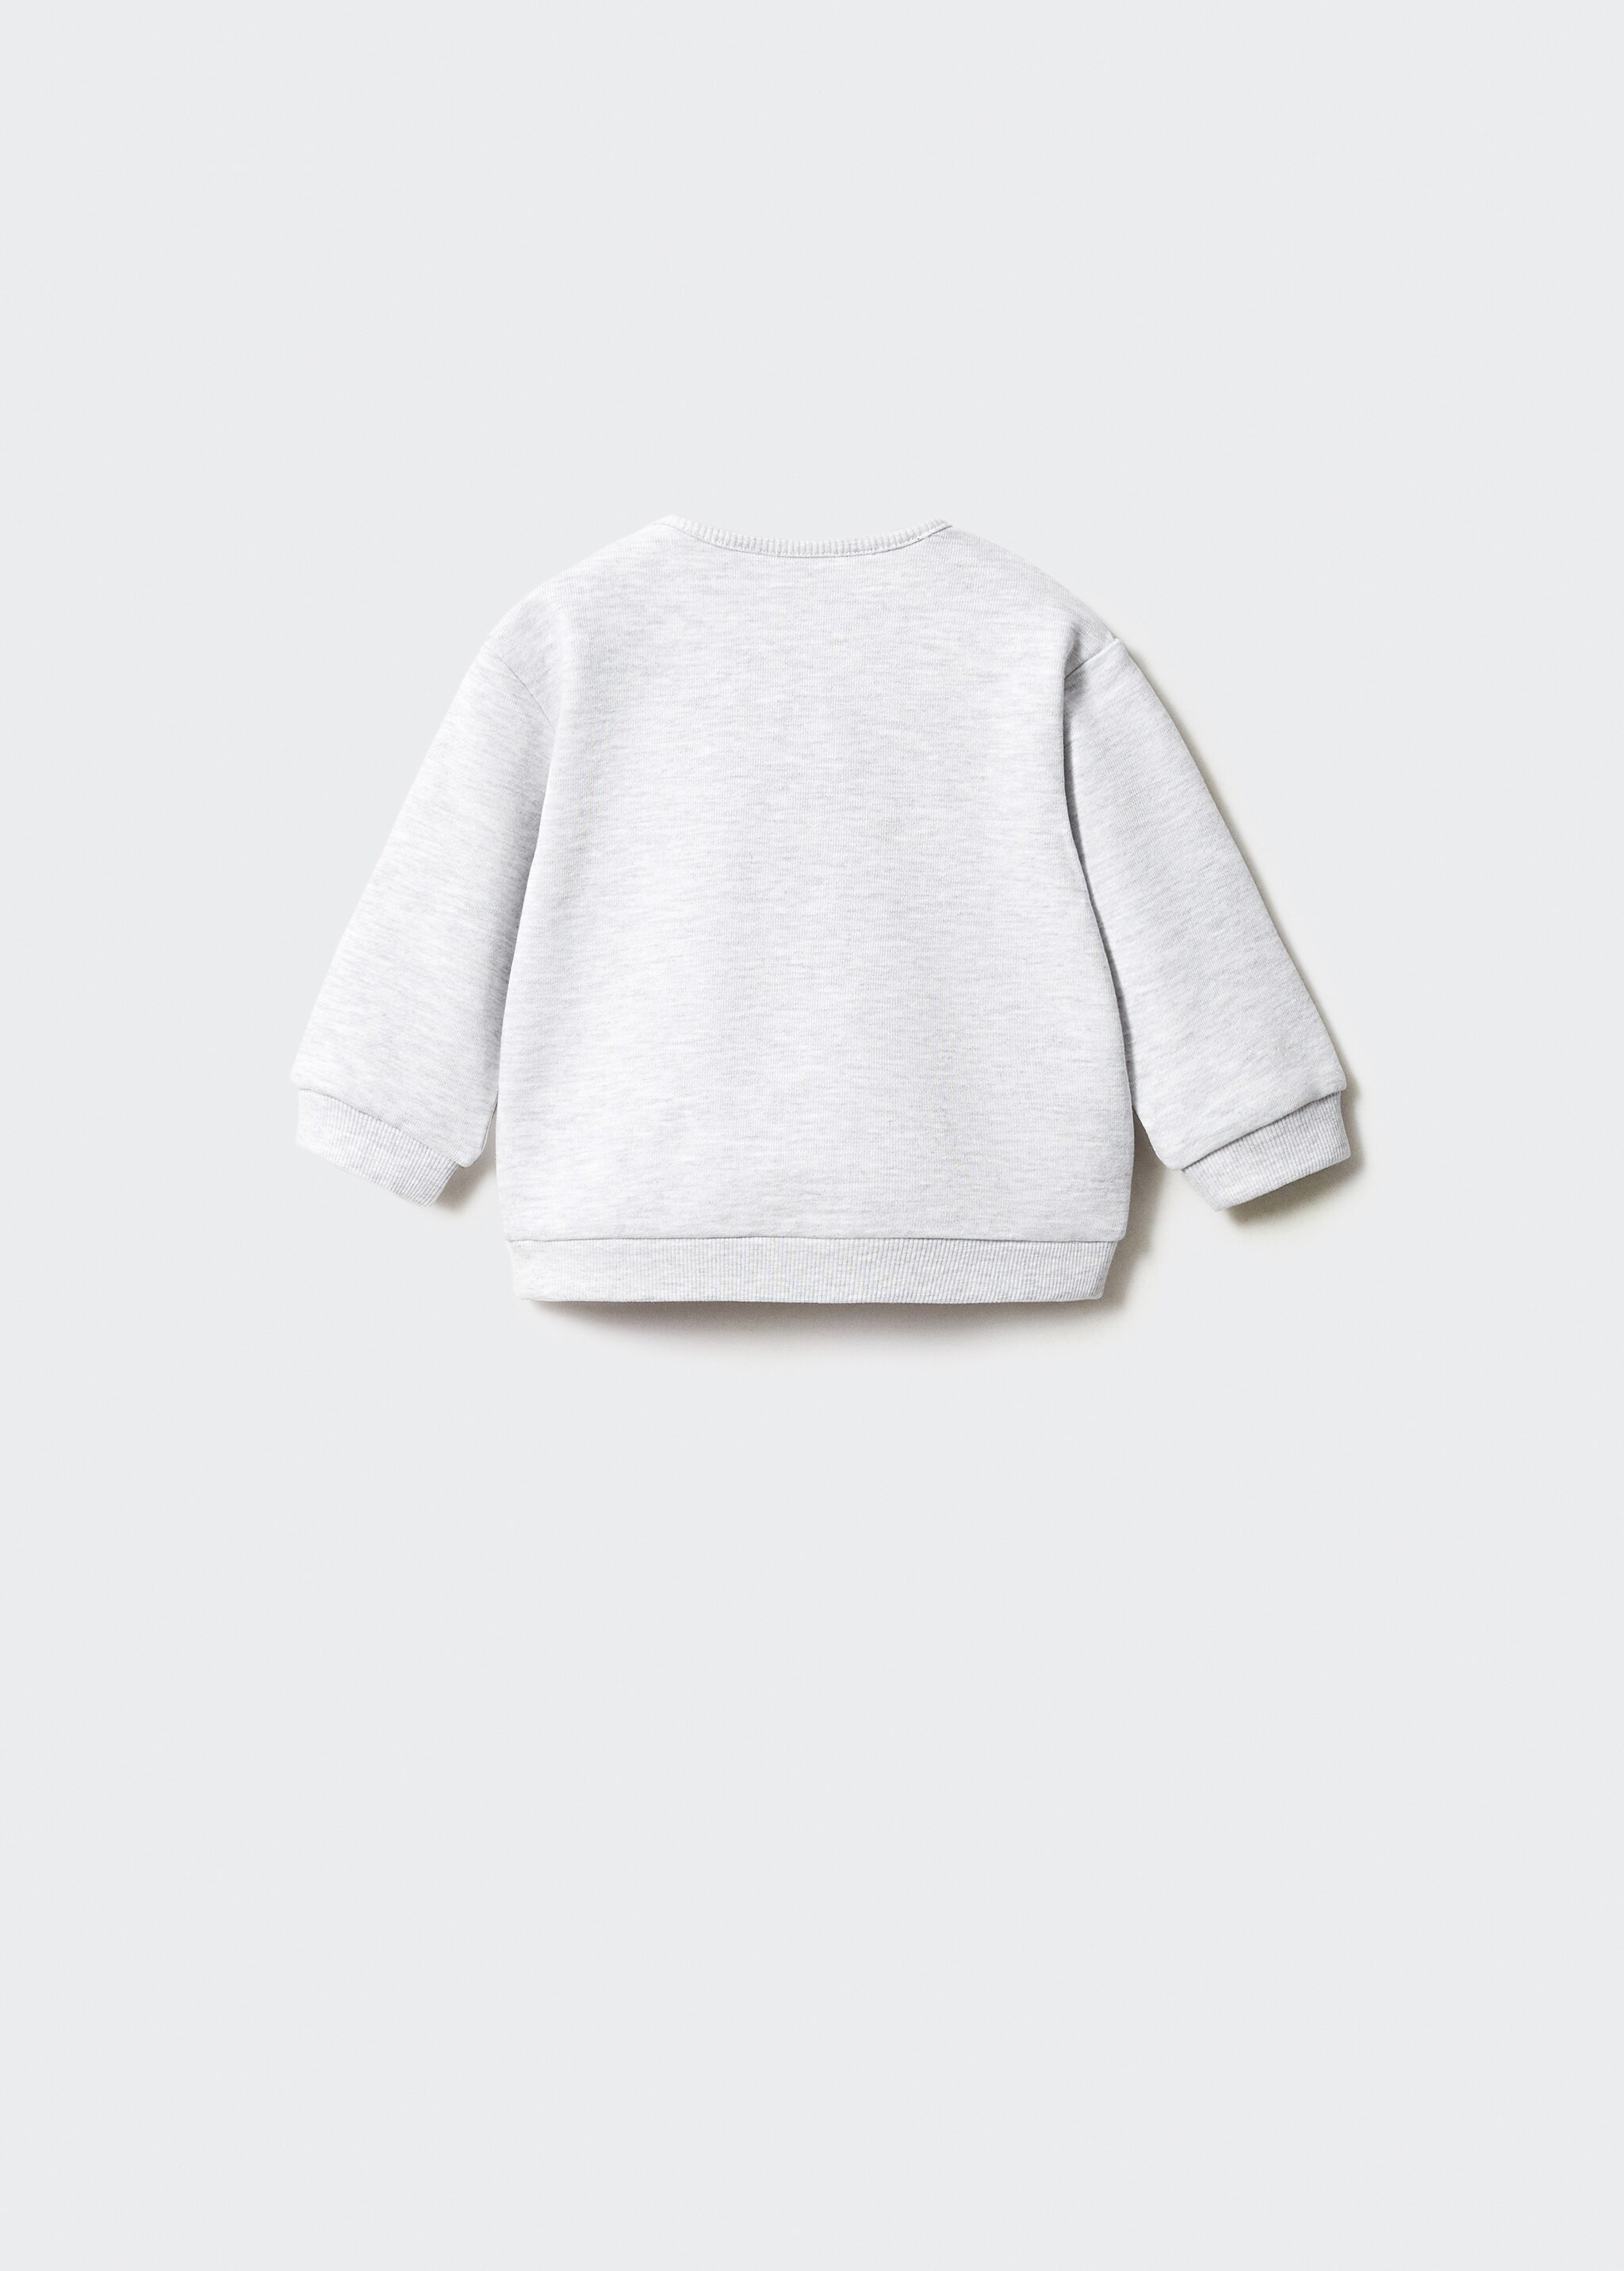 Printed sweatshirt with pocket - Reverse of the article